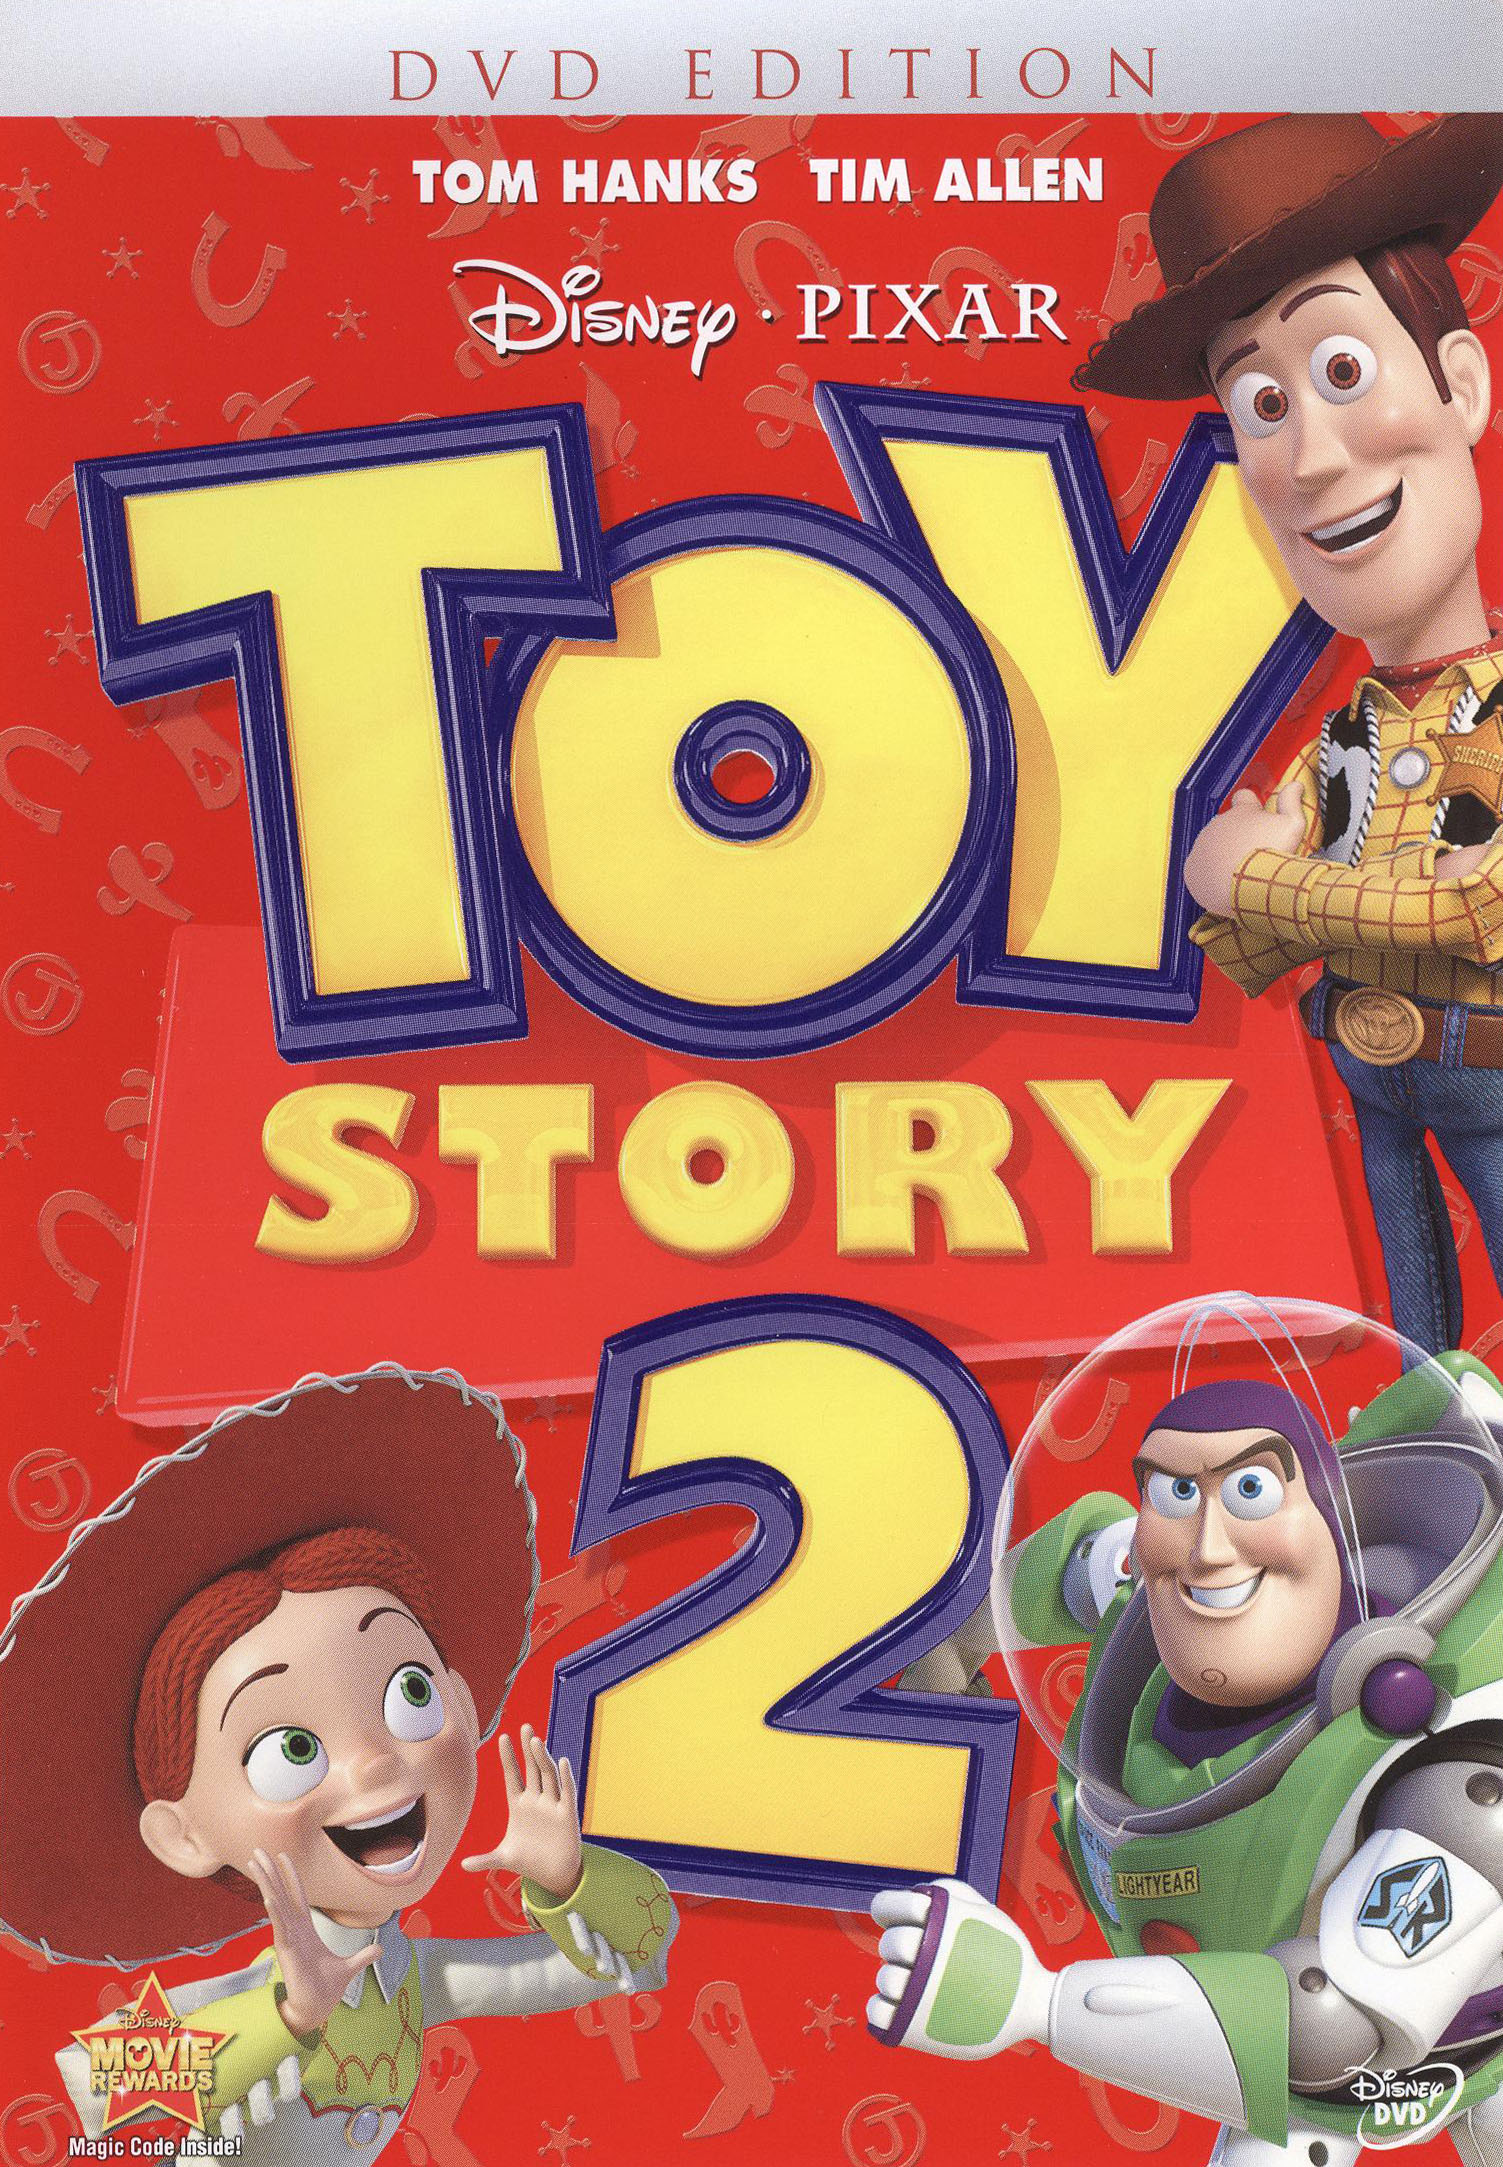 Toy Story 2 [Special Edition] [DVD] [1999] - Best Buy